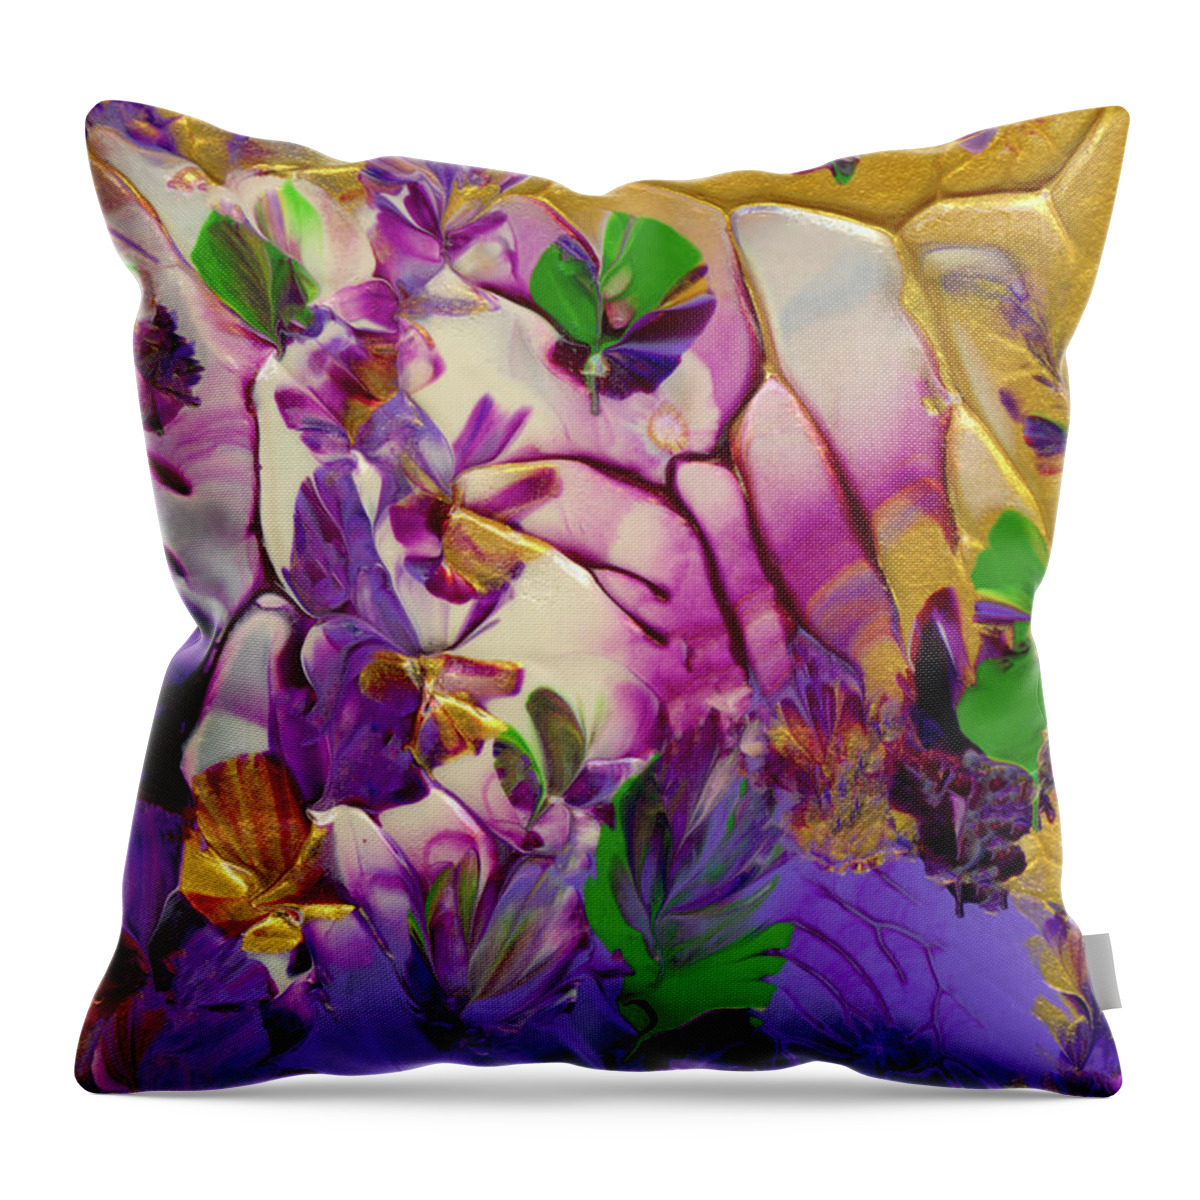 Flowers Throw Pillow featuring the painting This Planet Earth by Nan Bilden